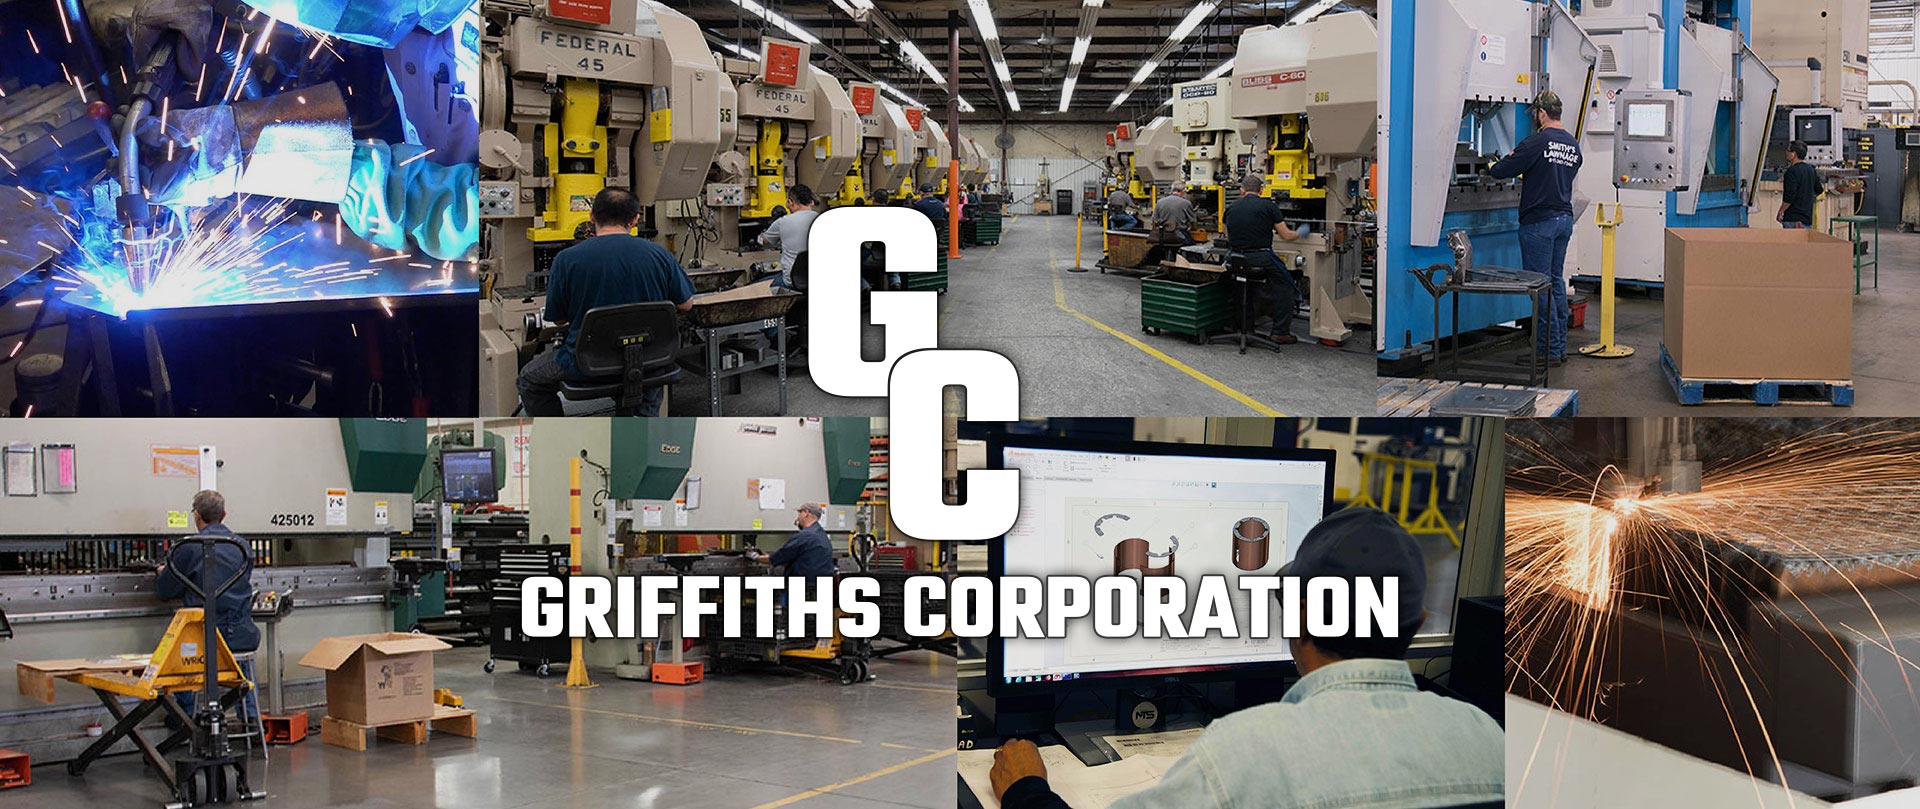 Griffiths Corporation Metal Stamping